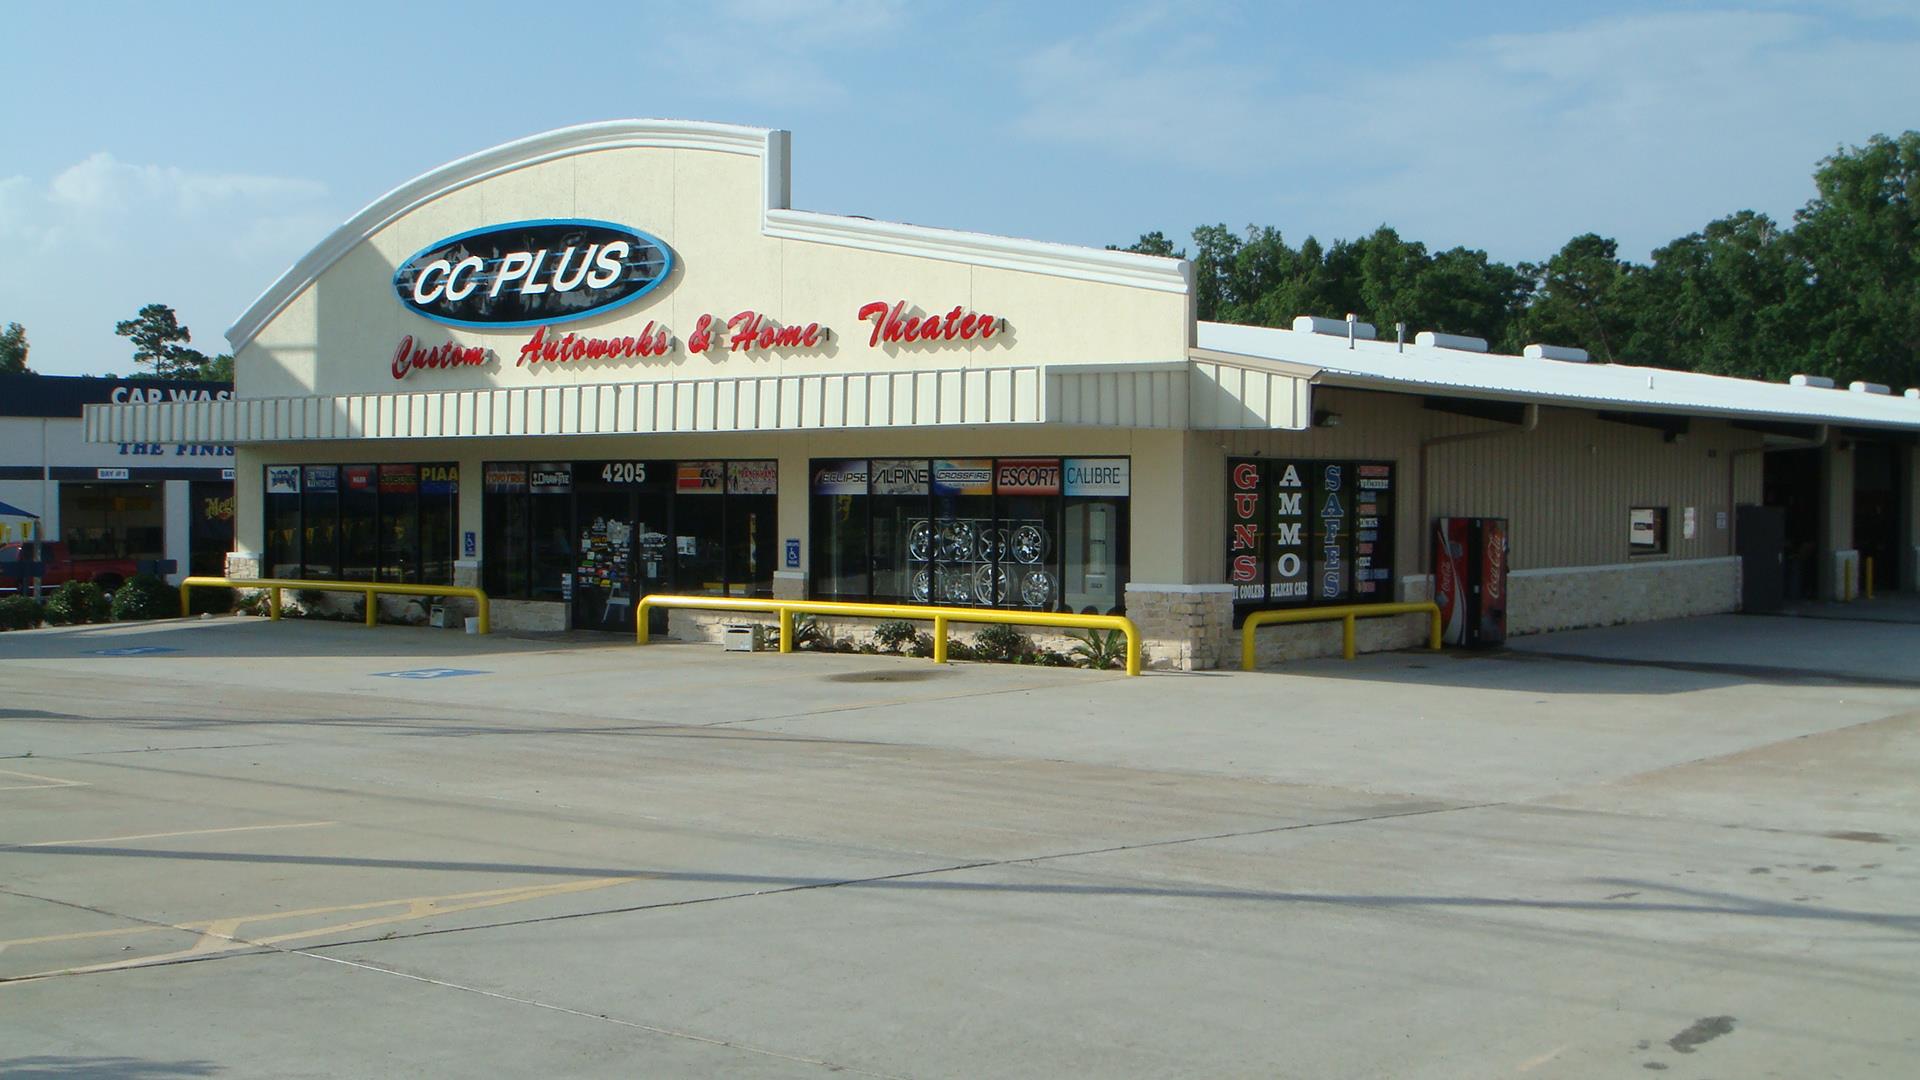 The outside view of the CC Plus Trucks, Guns and Ammo storefront.